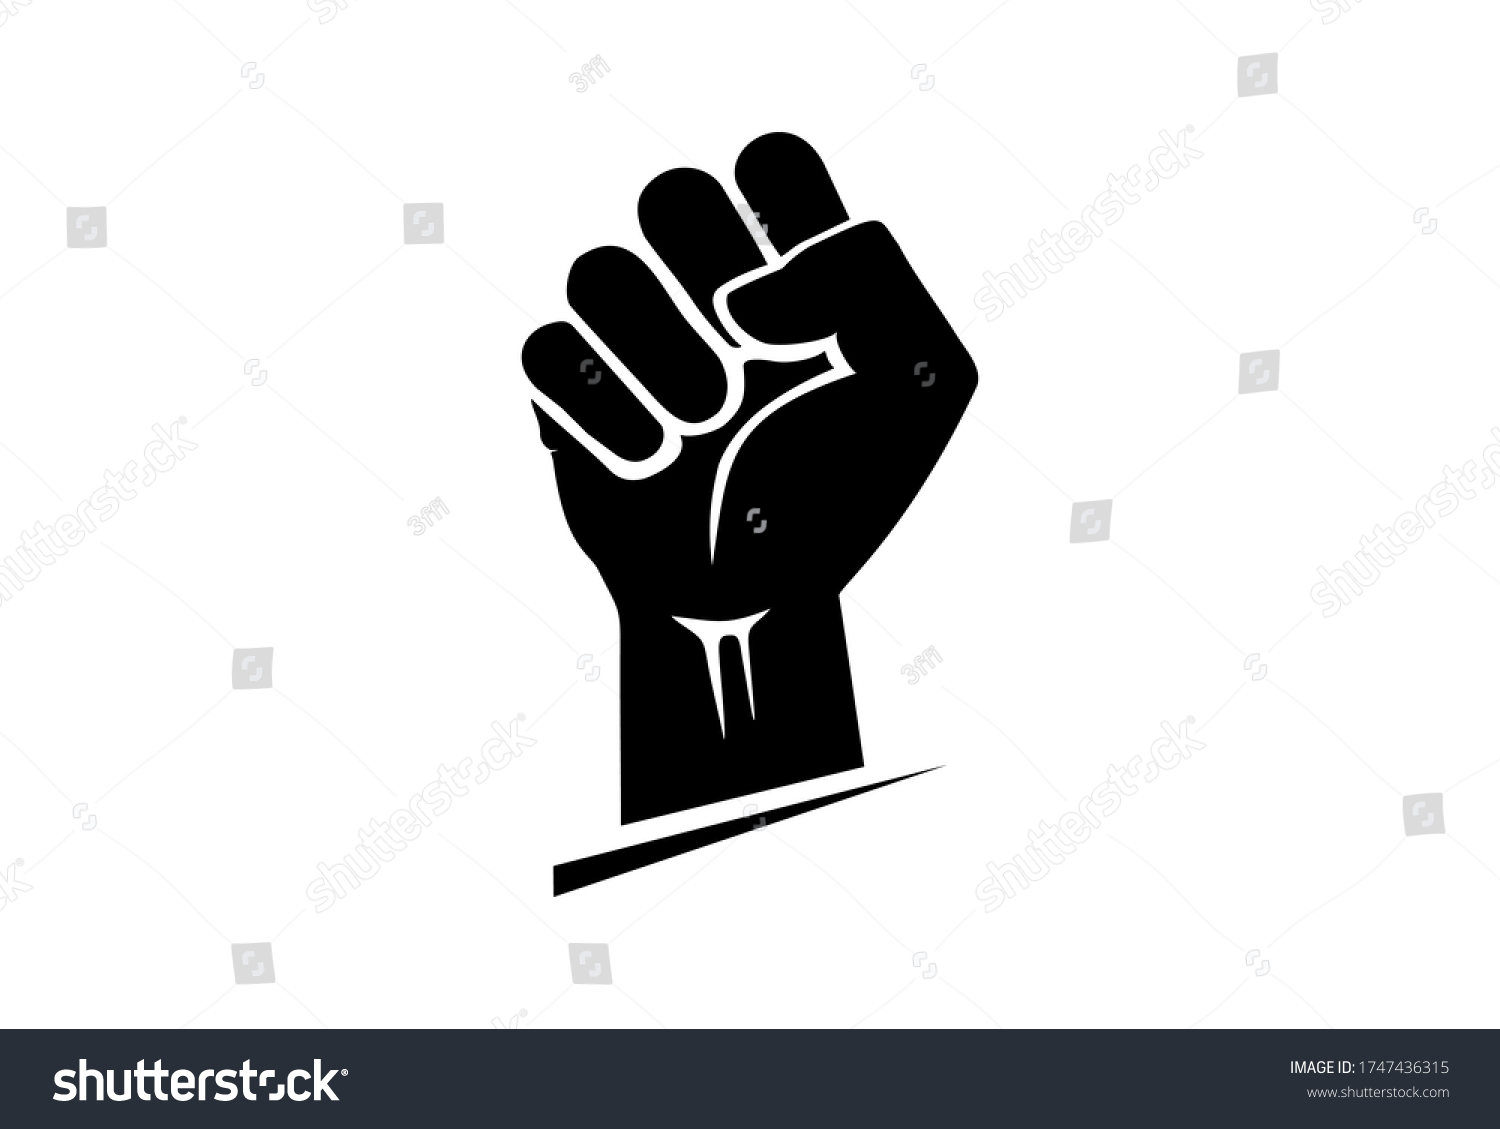 Black hand raised in a clenched fist. Freedom sign and protest symbol - civil rights movement, black lives matter icon. #1747436315